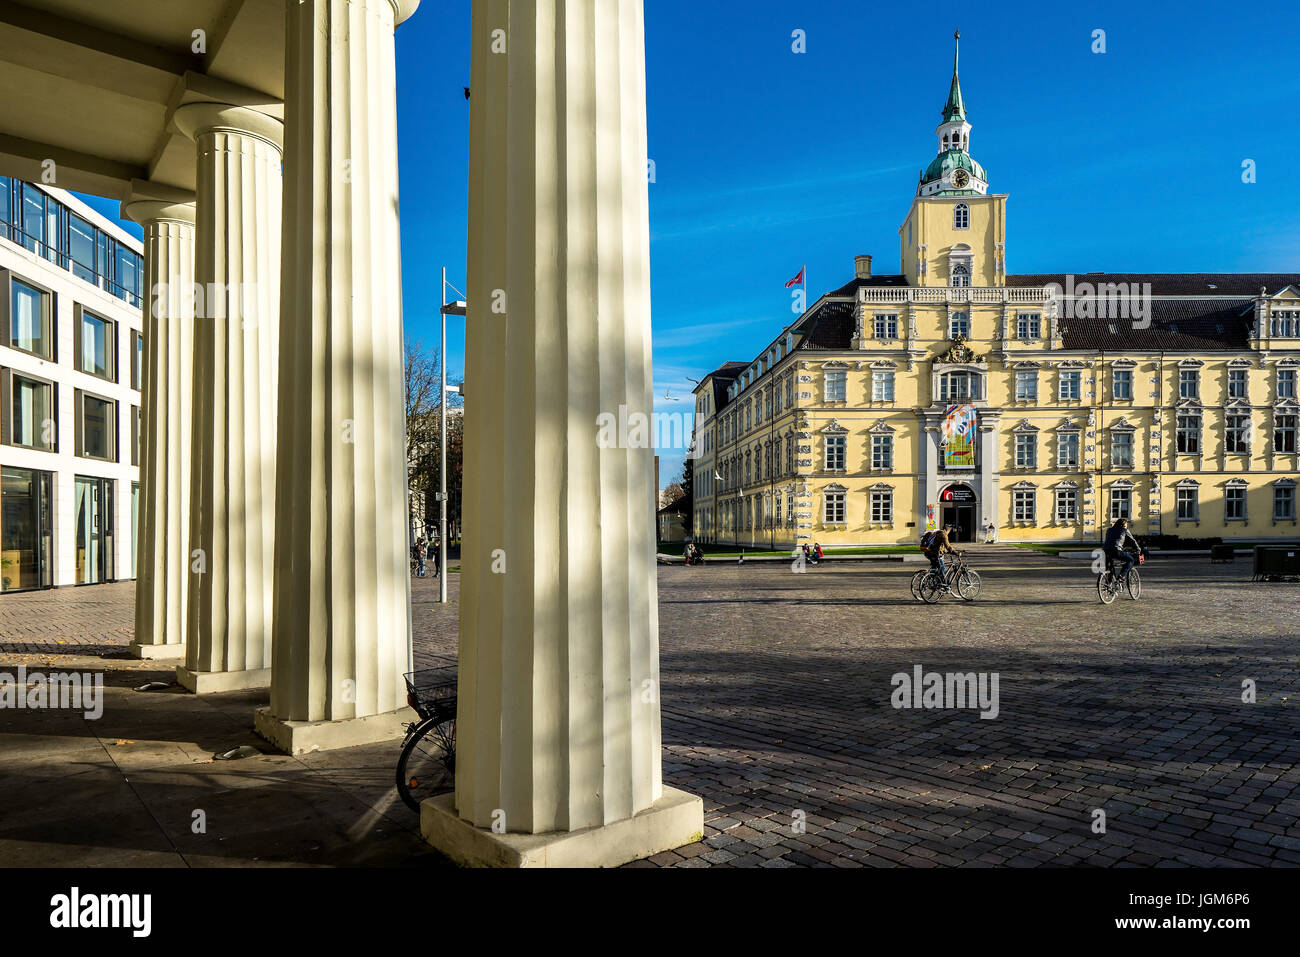 The Federal Republic of Germany, Lower Saxony, North Germany, Oldenburg, castle, castle square, castle garden, architecture, building, historically, h Stock Photo